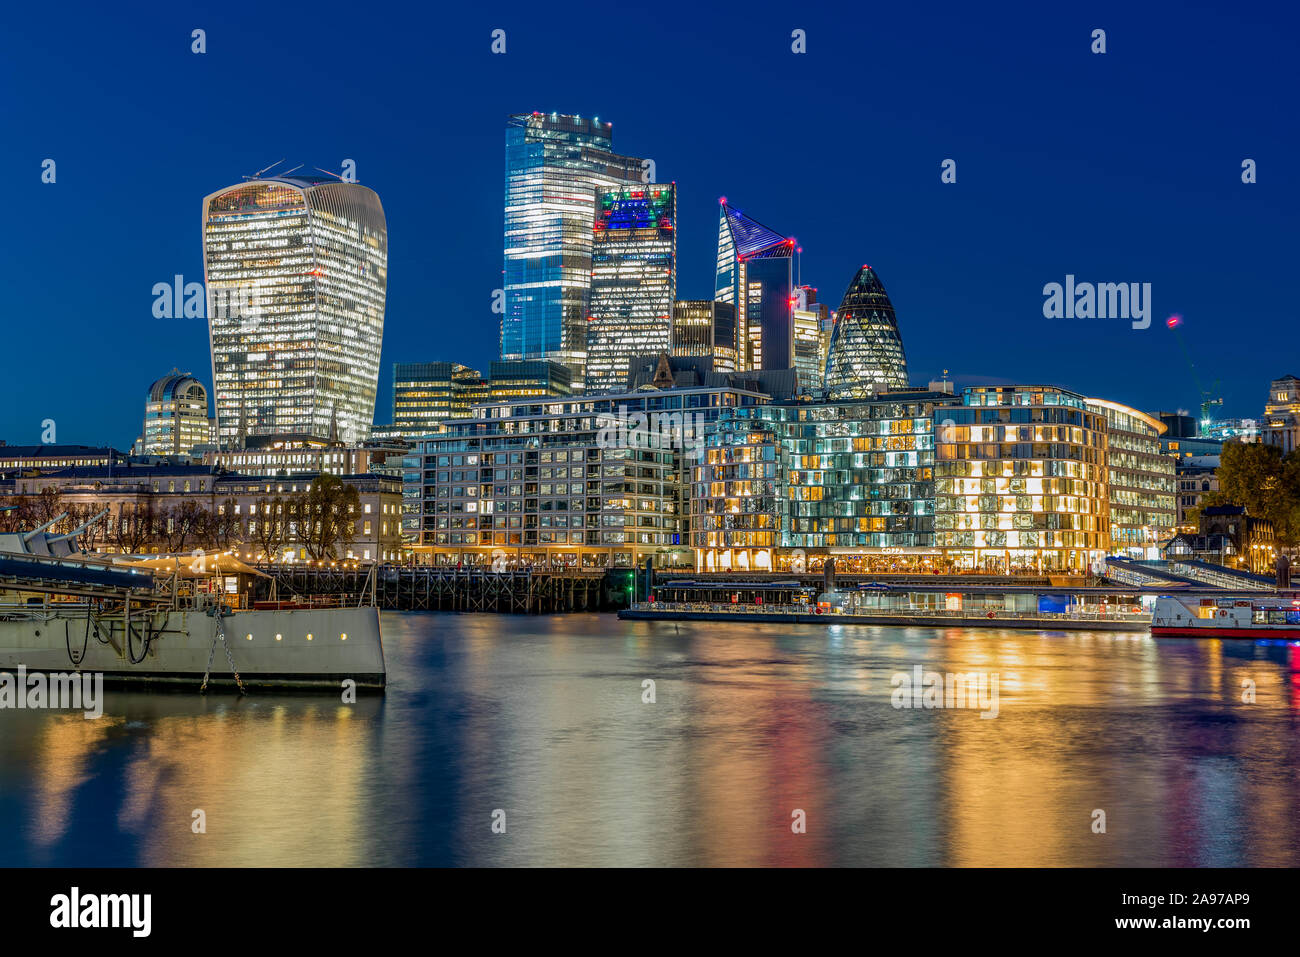 London Evening cityscape with a museum boat and skyscrapers Stock Photo